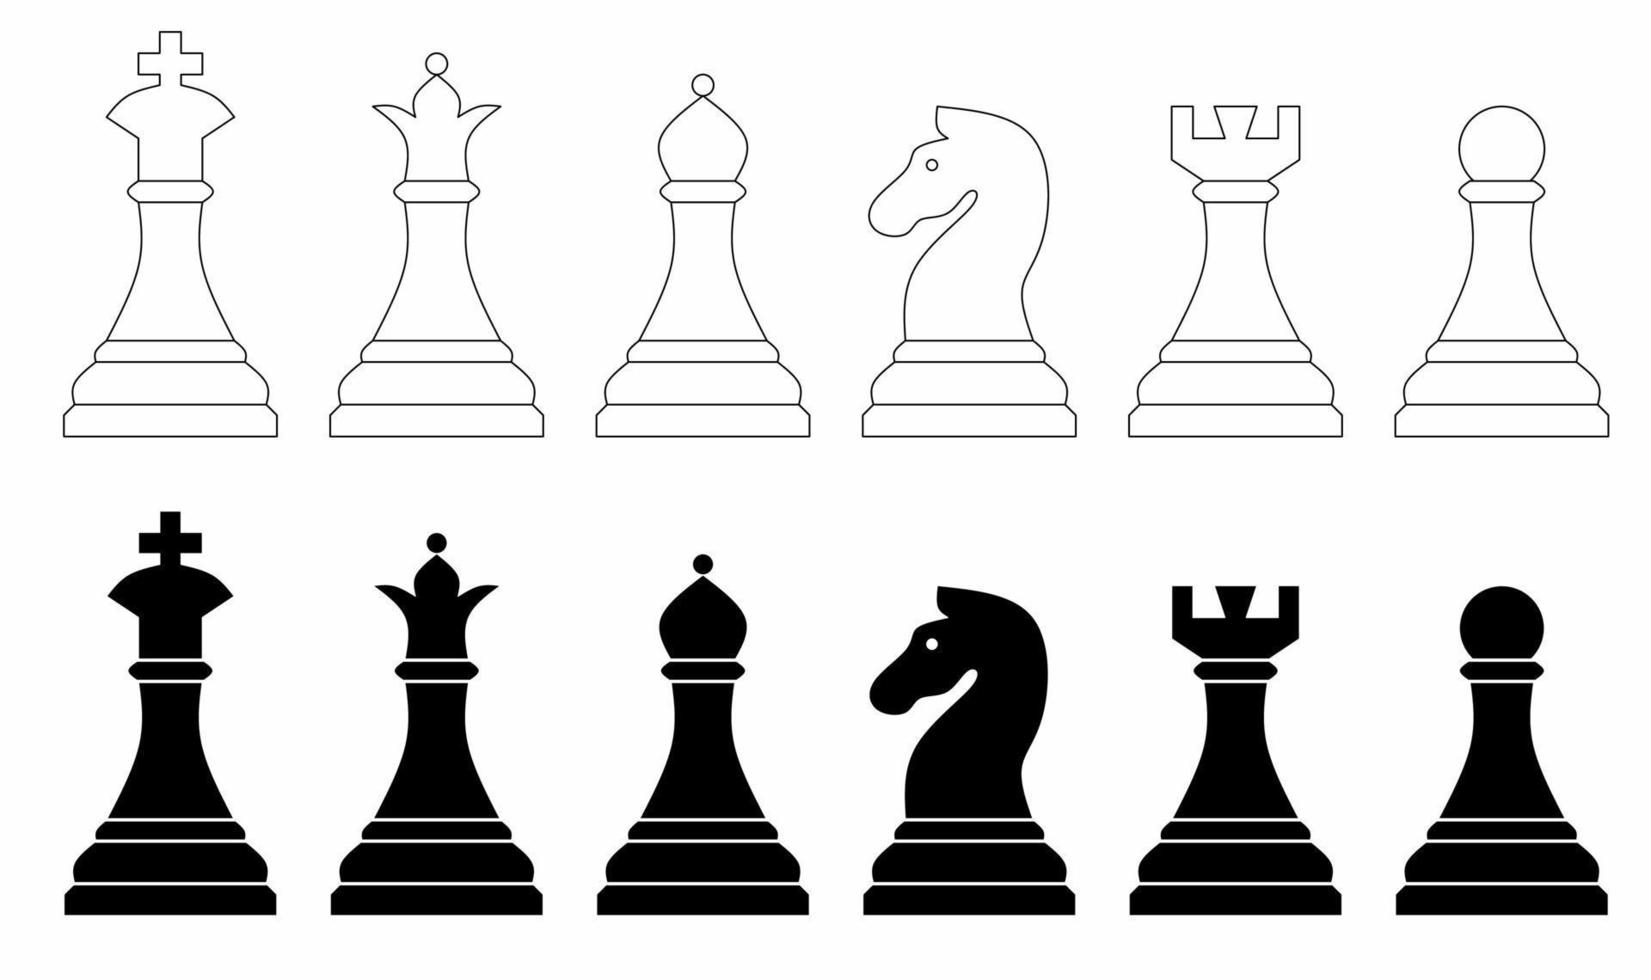 outline silhouette Chess piece icons set isolated on white background vector